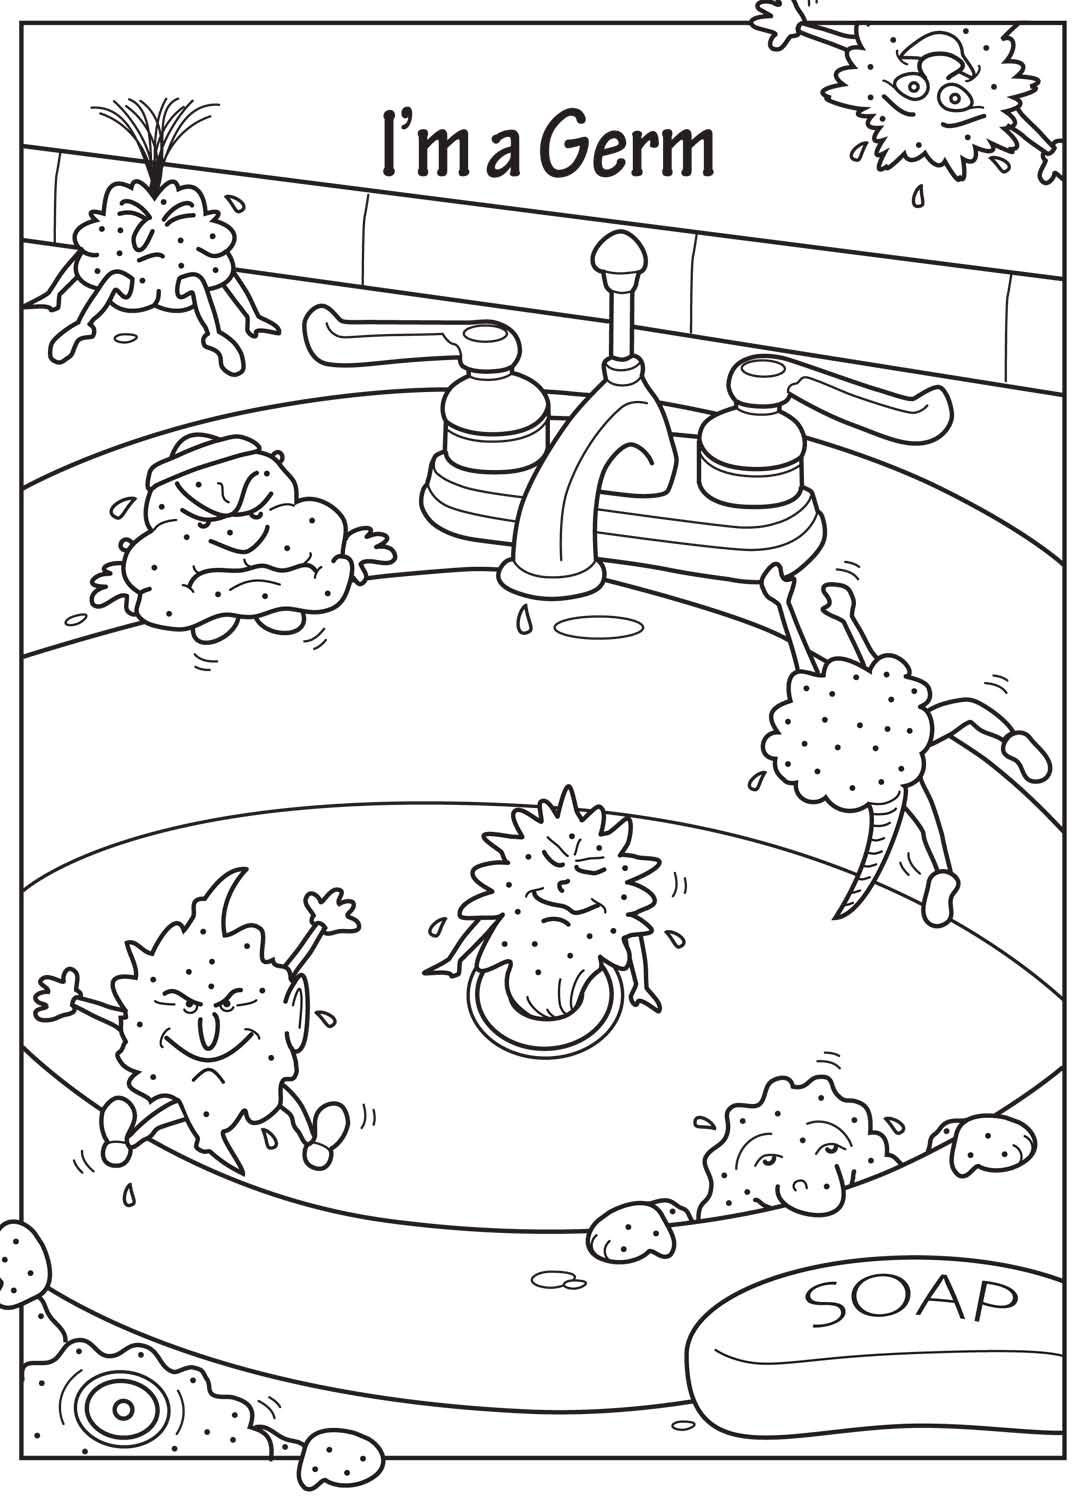 Printable Coloring Pages Of Germs | Roger Bain Writes Songs About | Germs Worksheets Printables